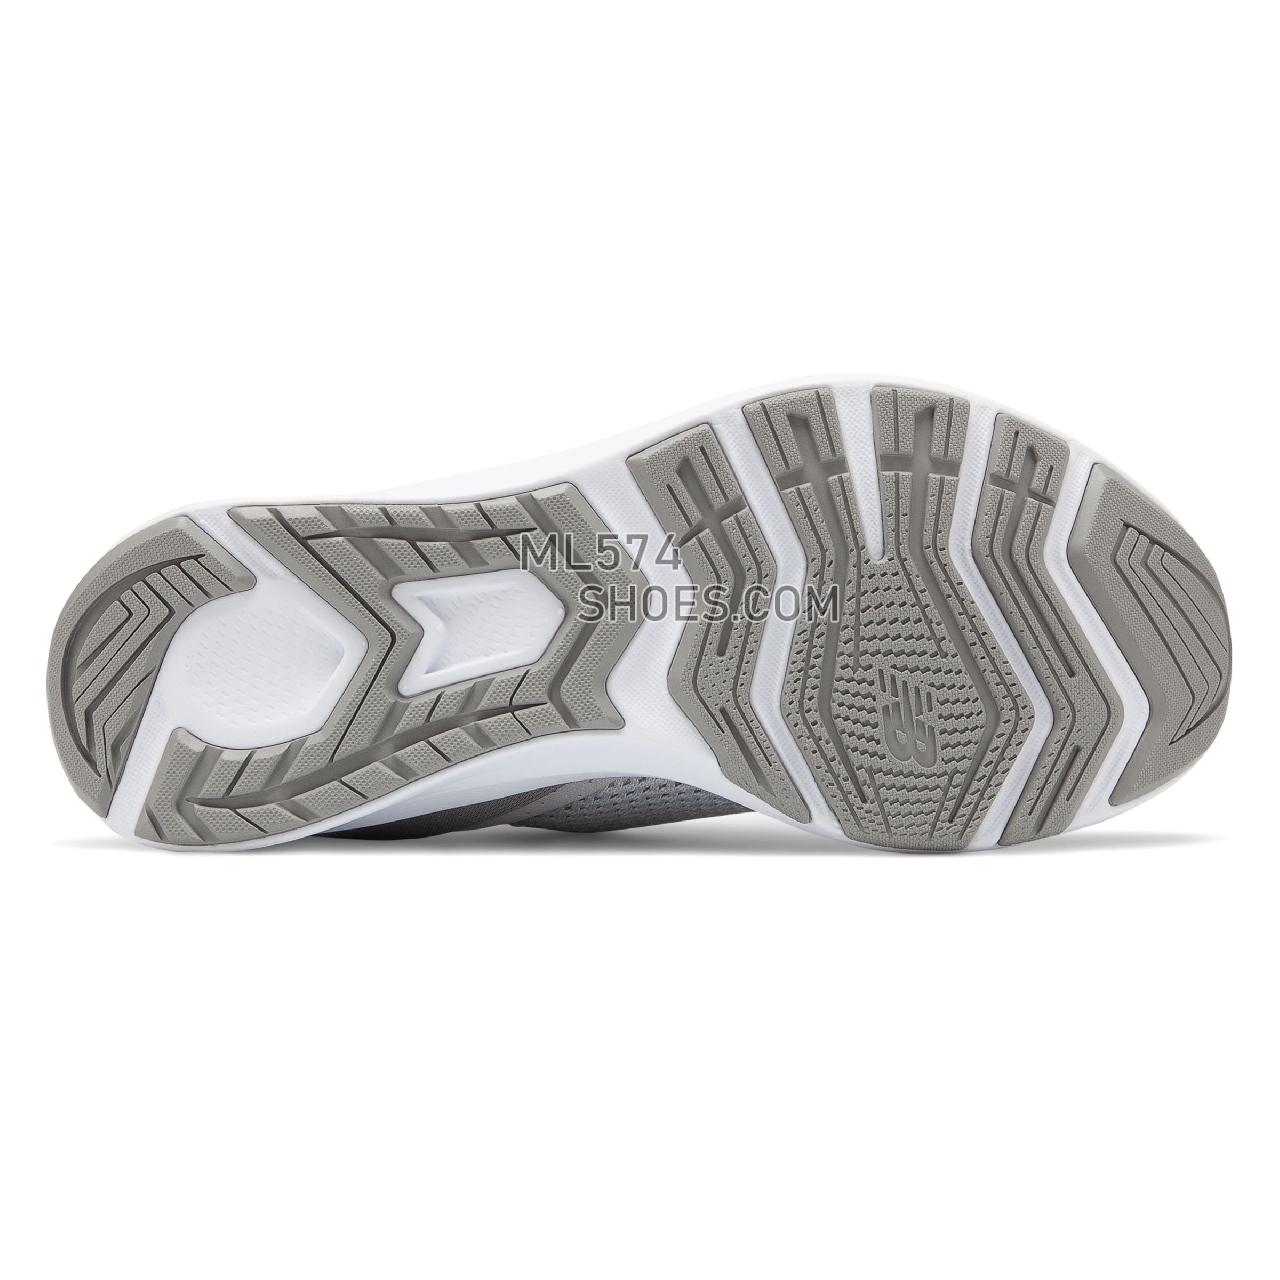 New Balance FuelCore Nergize Easy Slip-On - Women's Sport Style Sneakers - Summer Fog with Rain Cloud and Team Away Grey - WLNRSLG1